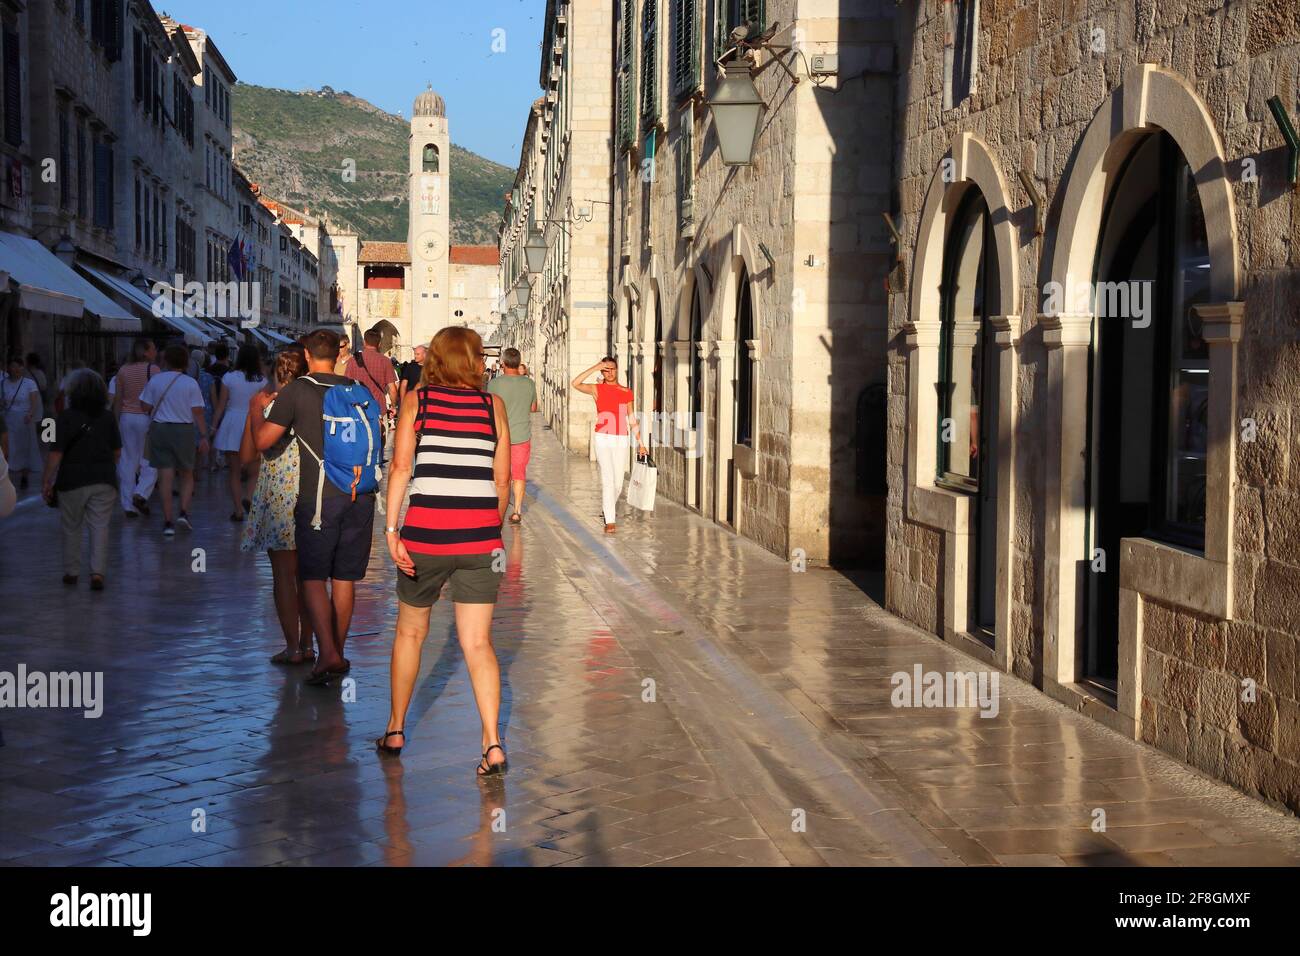 DUBROVNIK, CROATIA - JULY 26, 2019: Tourists visit Stradun street paved with polished limestone in Dubrovnik Old Town, a UNESCO World Heritage Site. Stock Photo